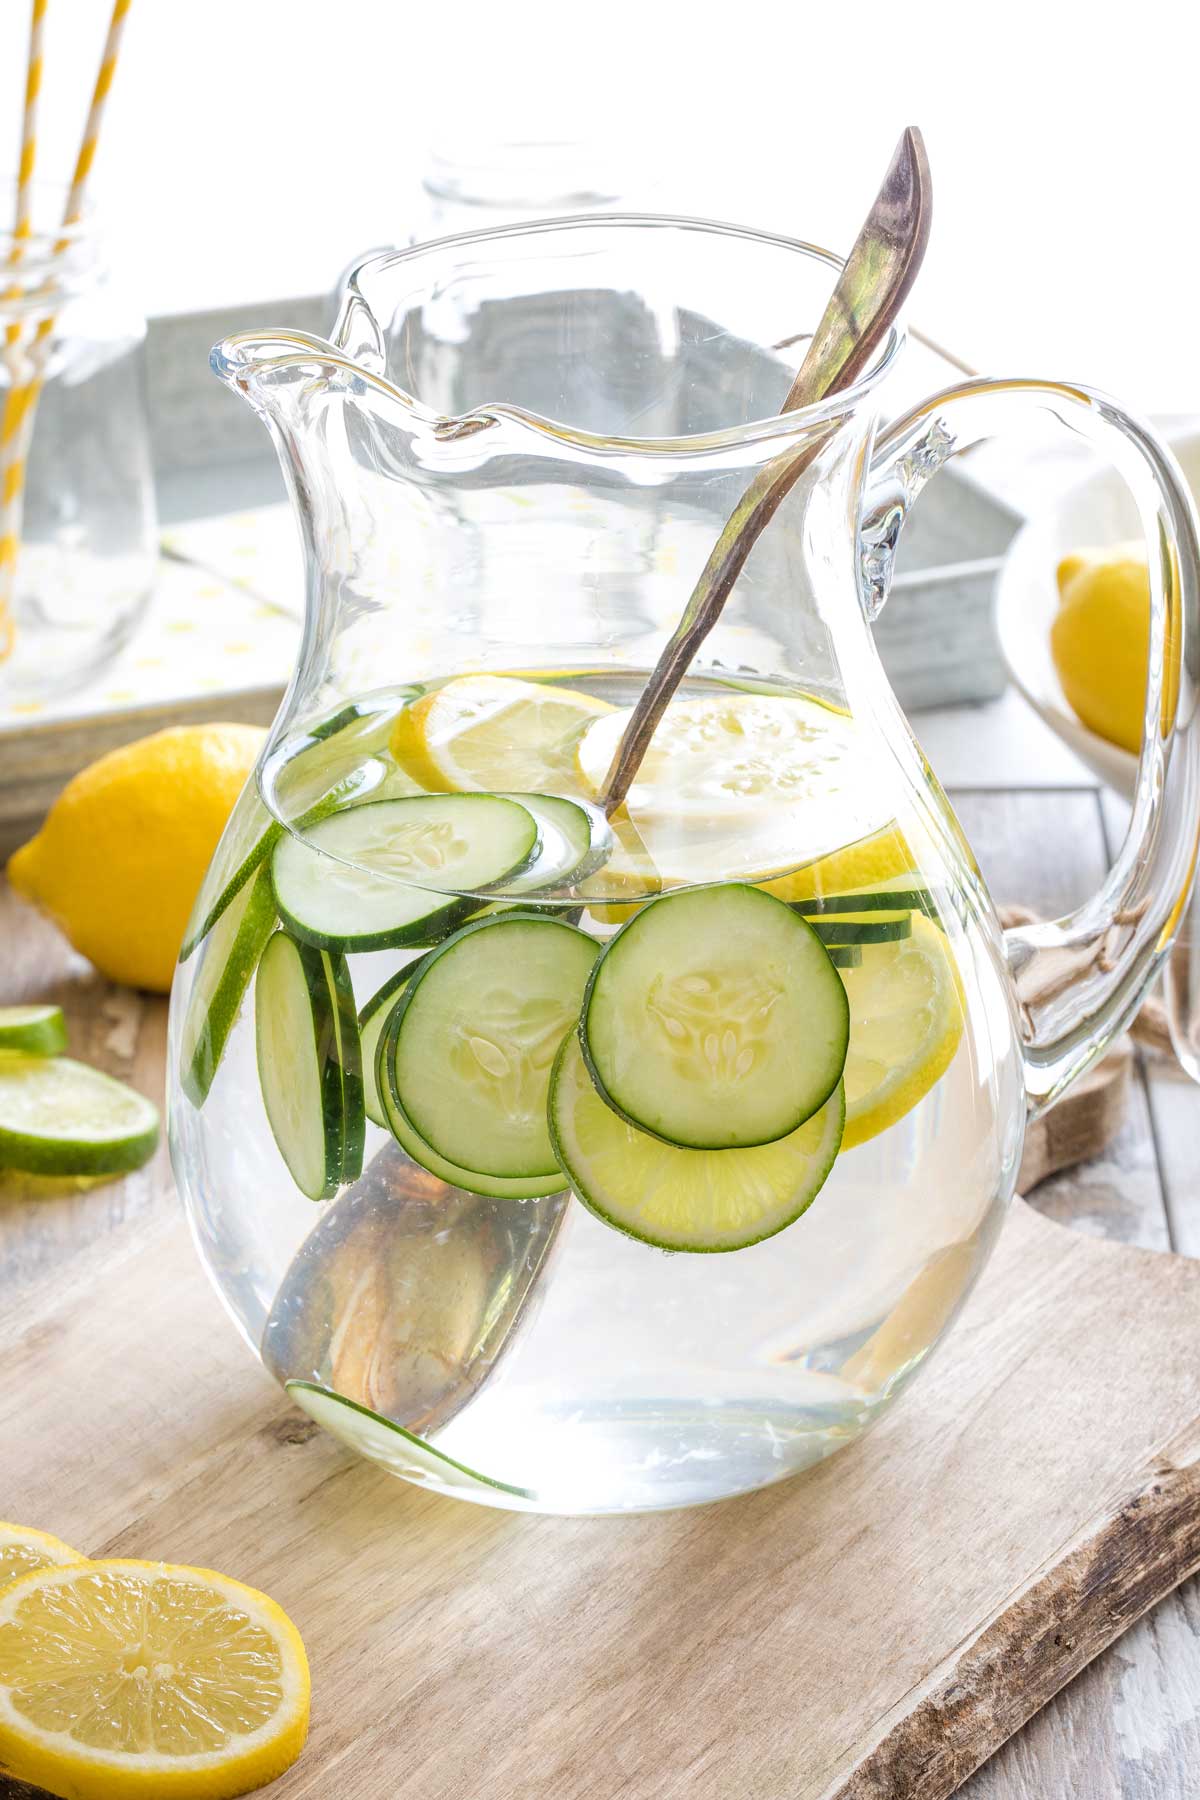 Pitcher of freshly made infused water on cutting board with large antique spoon in it to stir, and additional lemon and lime slices nearby on cutting board.